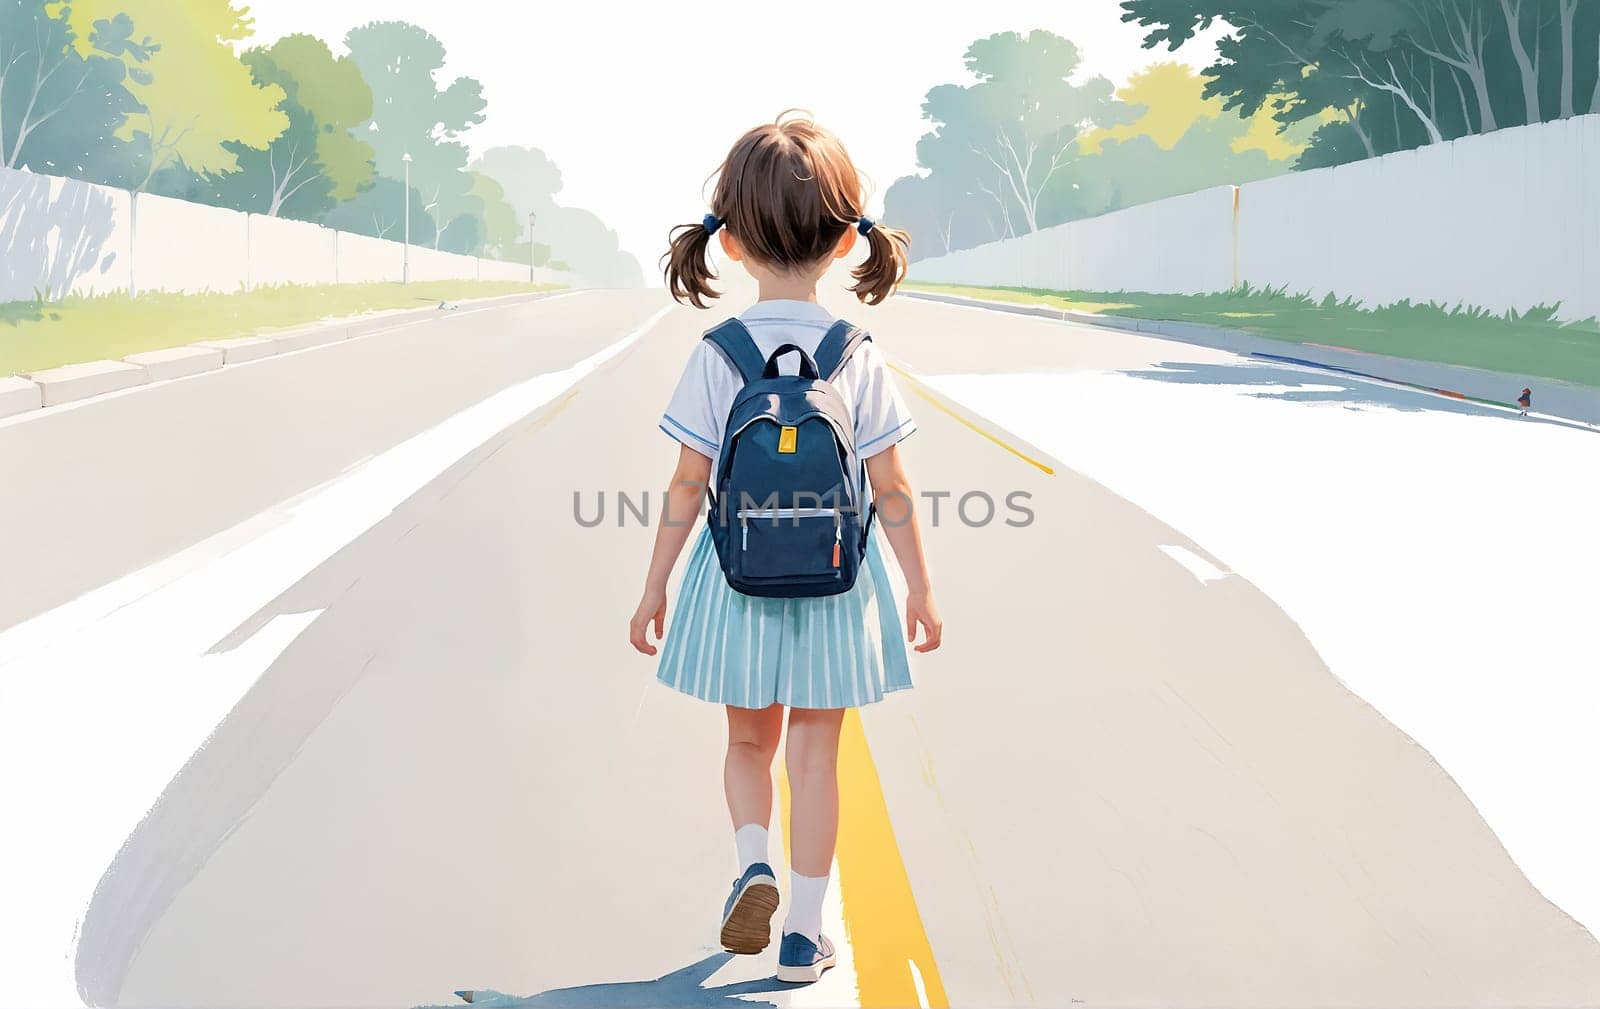 A young girl with pigtails walks down a road, carrying a blue backpack. She is wearing a light blue and white striped skirt and a white shirt. The road is empty - Generative AI